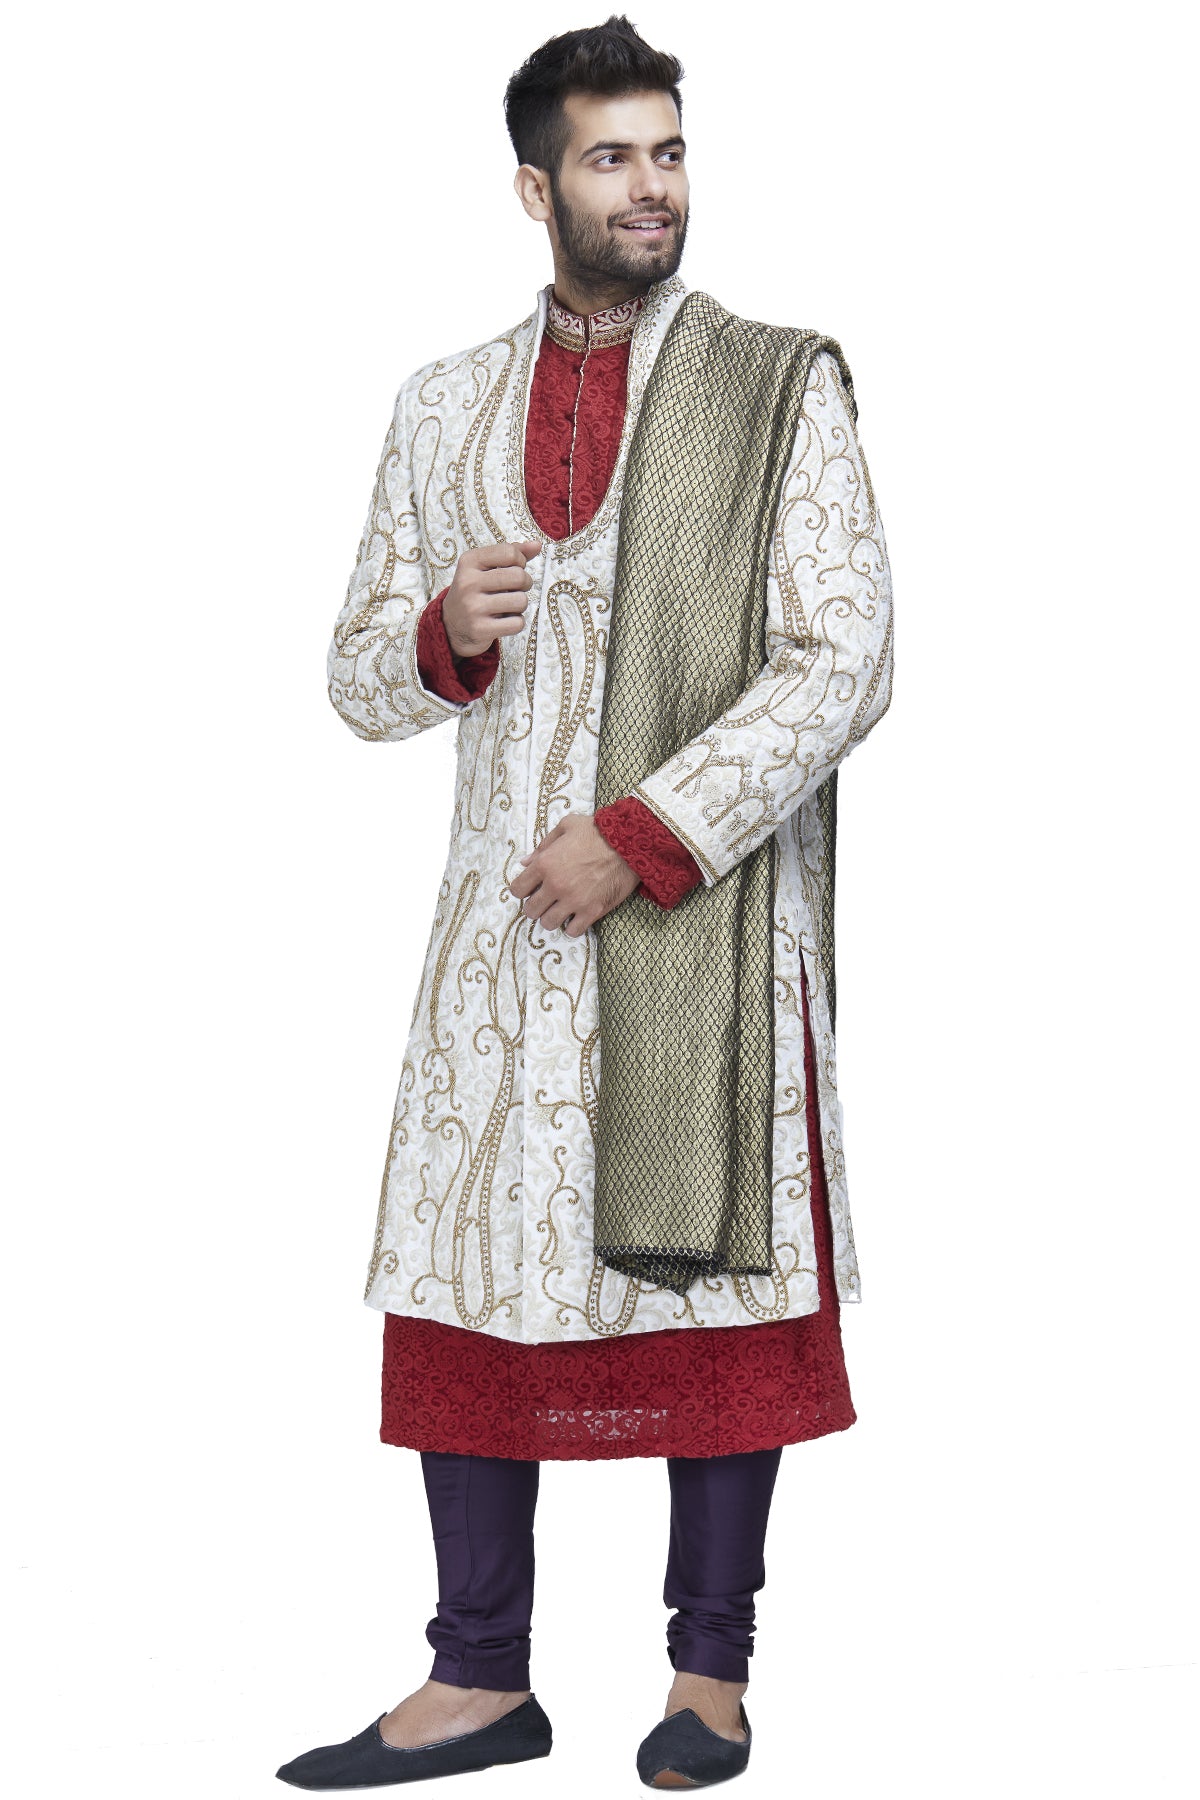 Four piece Ivory sherwani with maroon kurta inside and a purple dupatta and chuddidar is the show-stopper sherwani. Get ready to be the center of attention when you walk around wearing this outfit.
